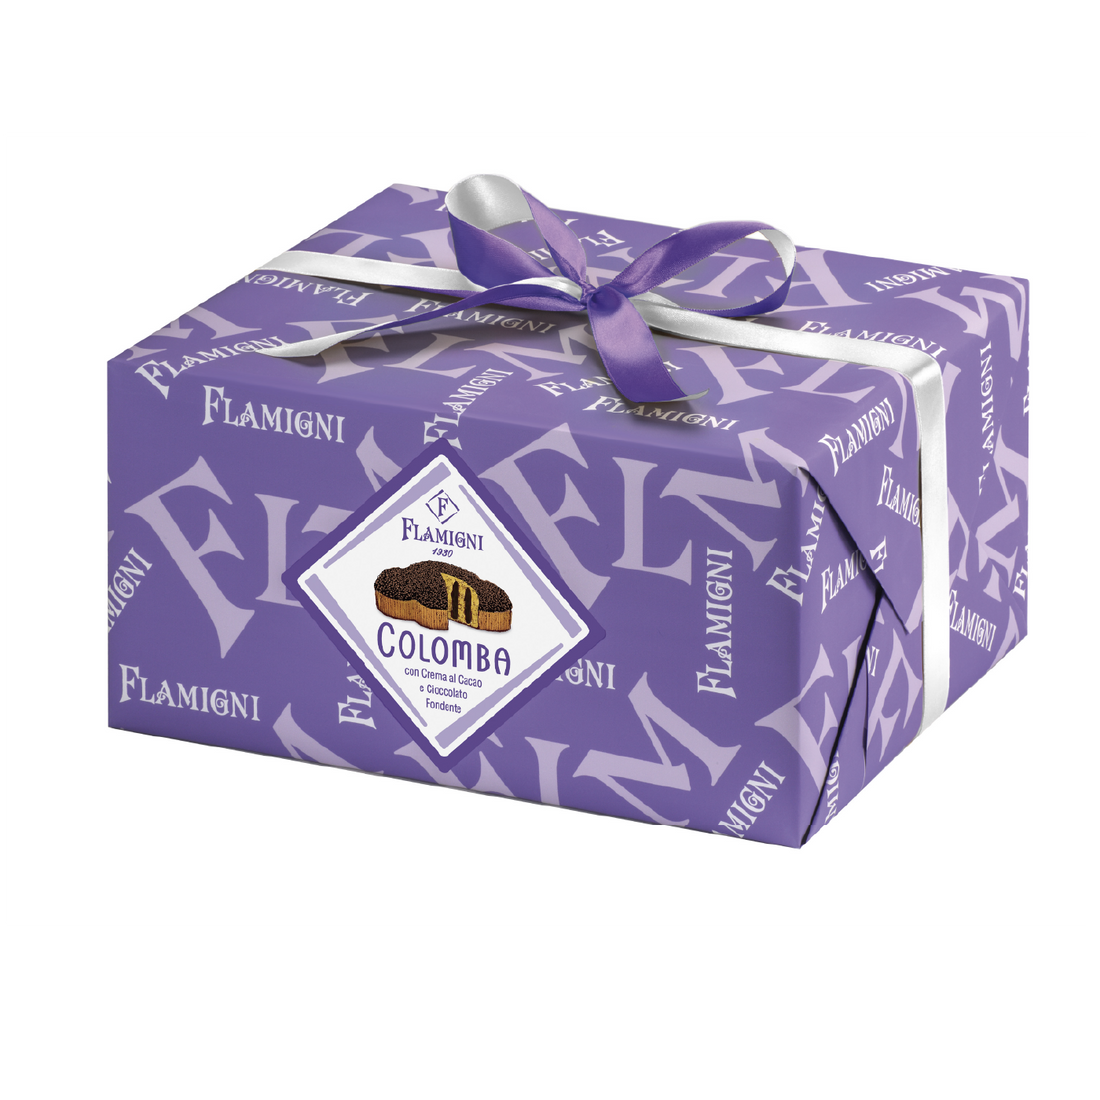 The Colomba with Dark Chocolate 